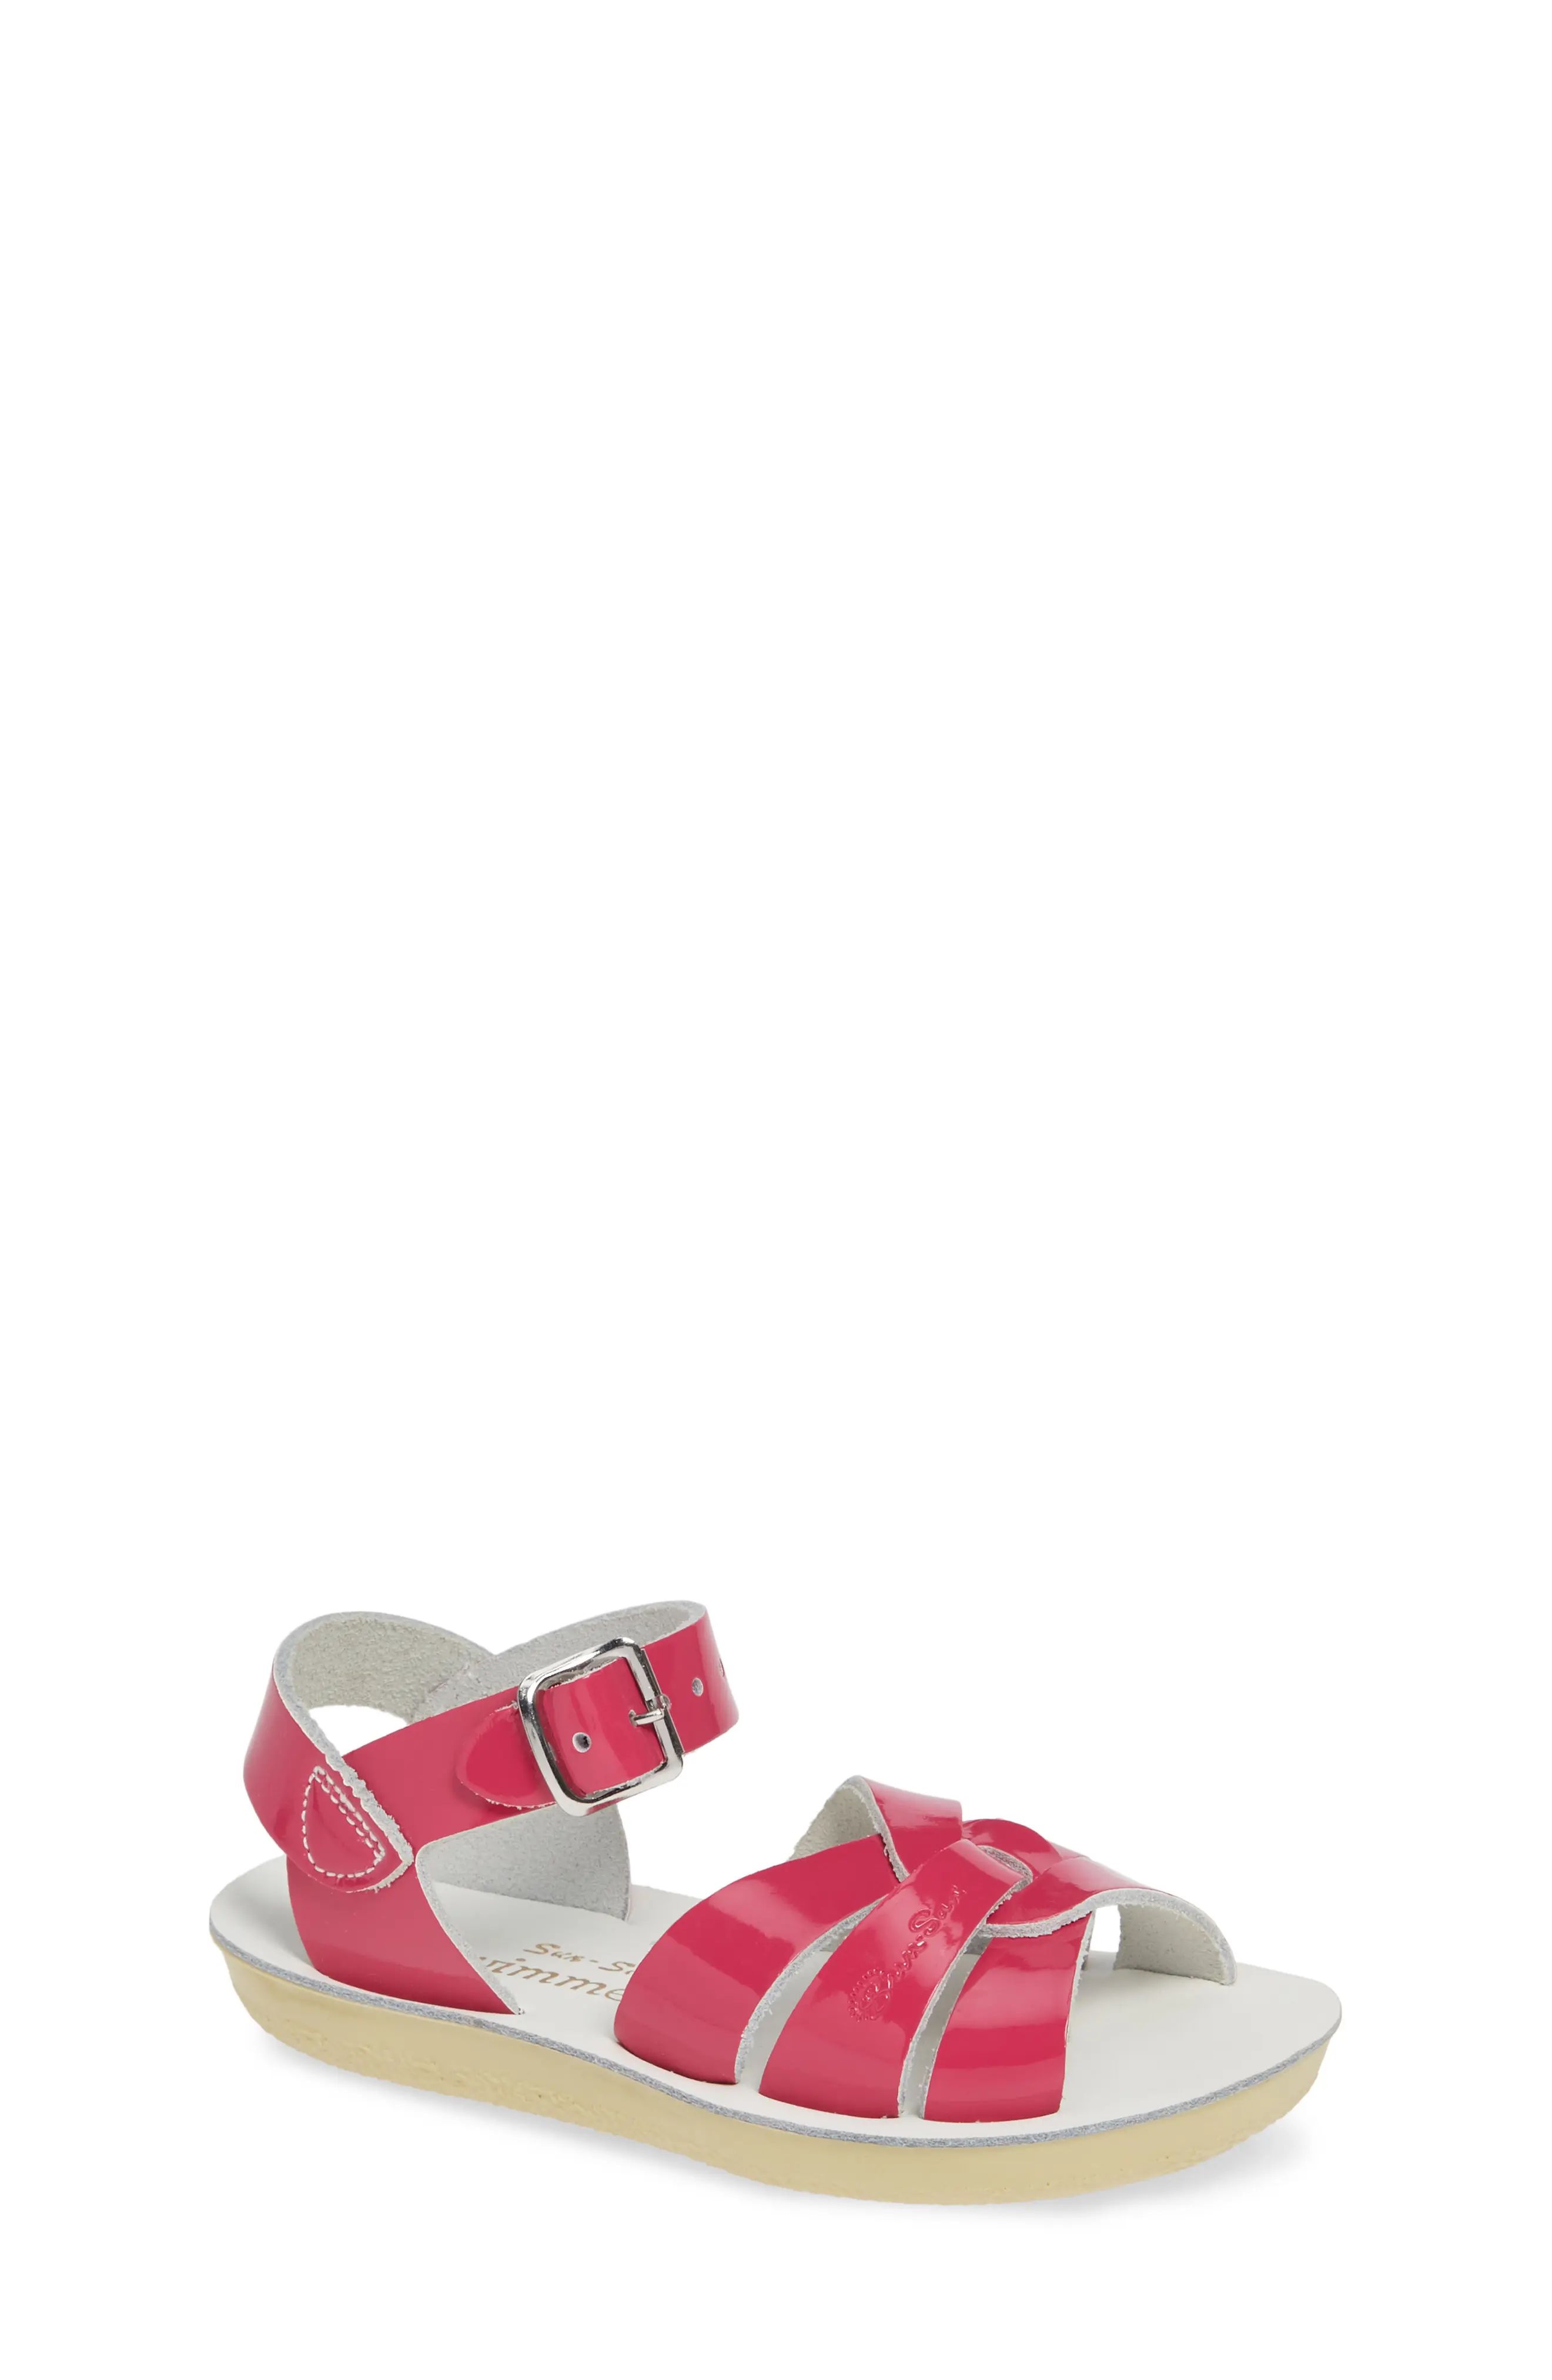 Salt Water Sandals by Hoy Swimmer Sandal in Shiny Fuchsia at Nordstrom, Size 12 M | Nordstrom